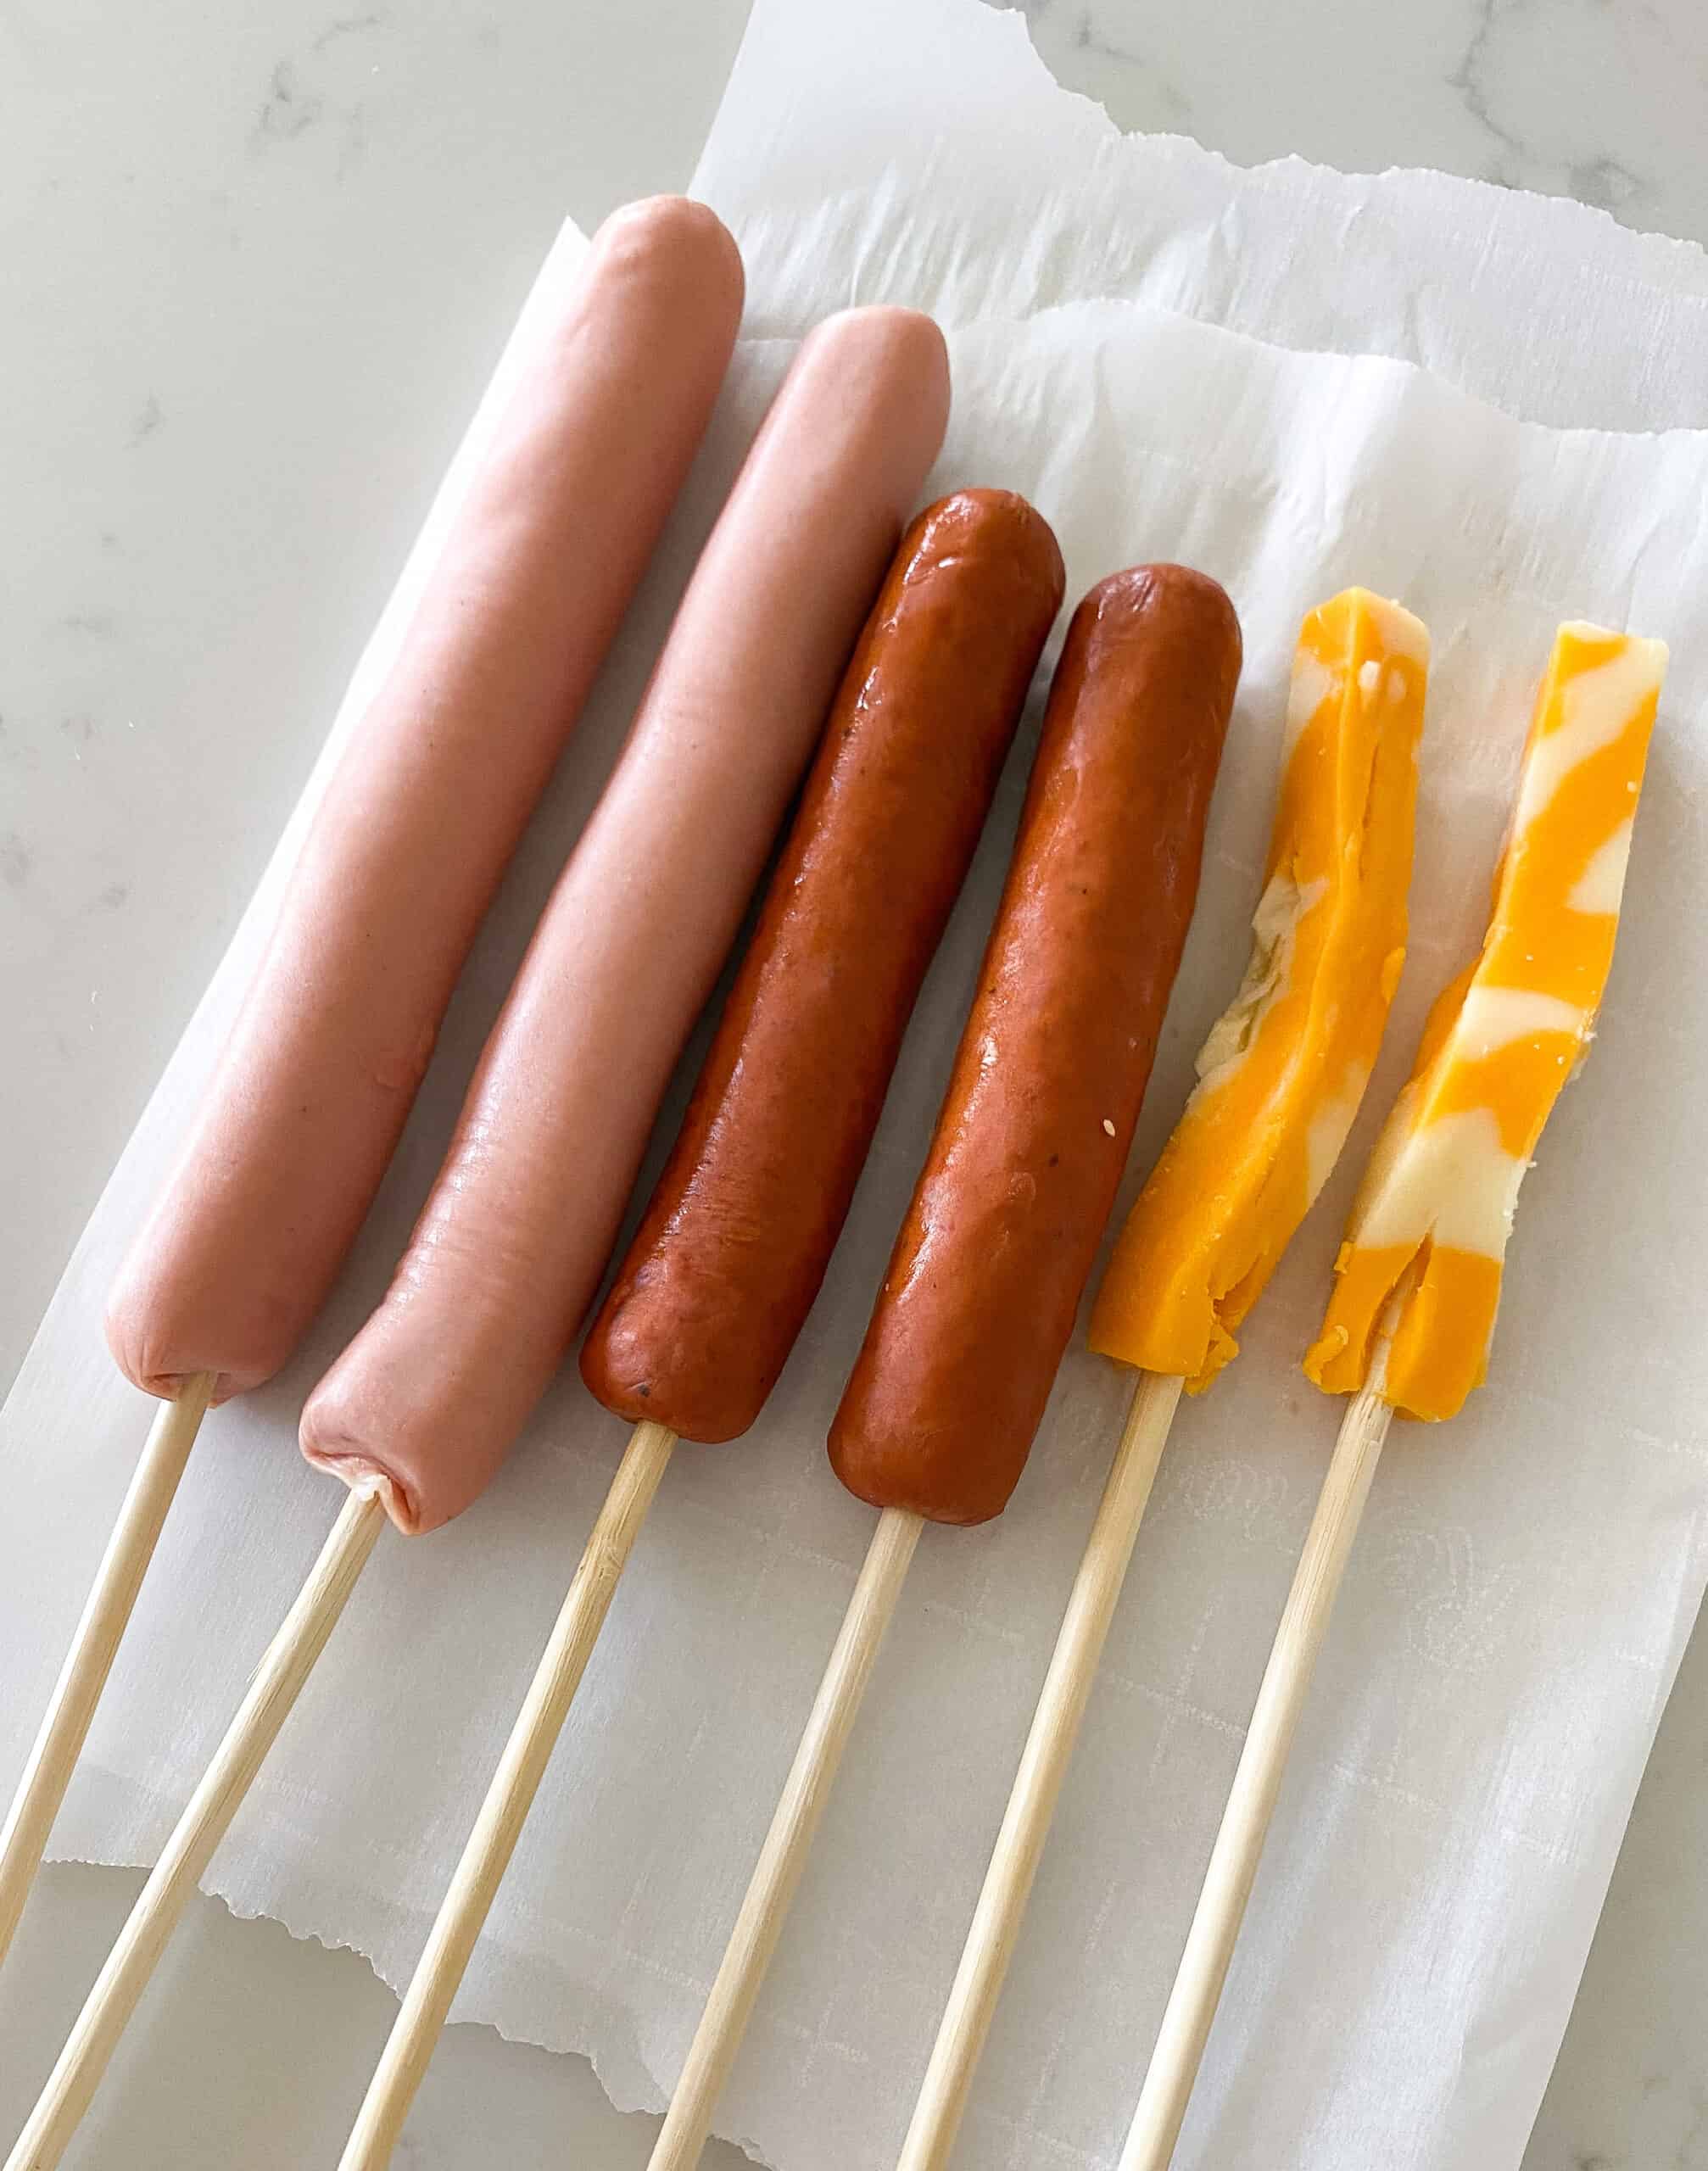 wooden skewers for corn dog recipe